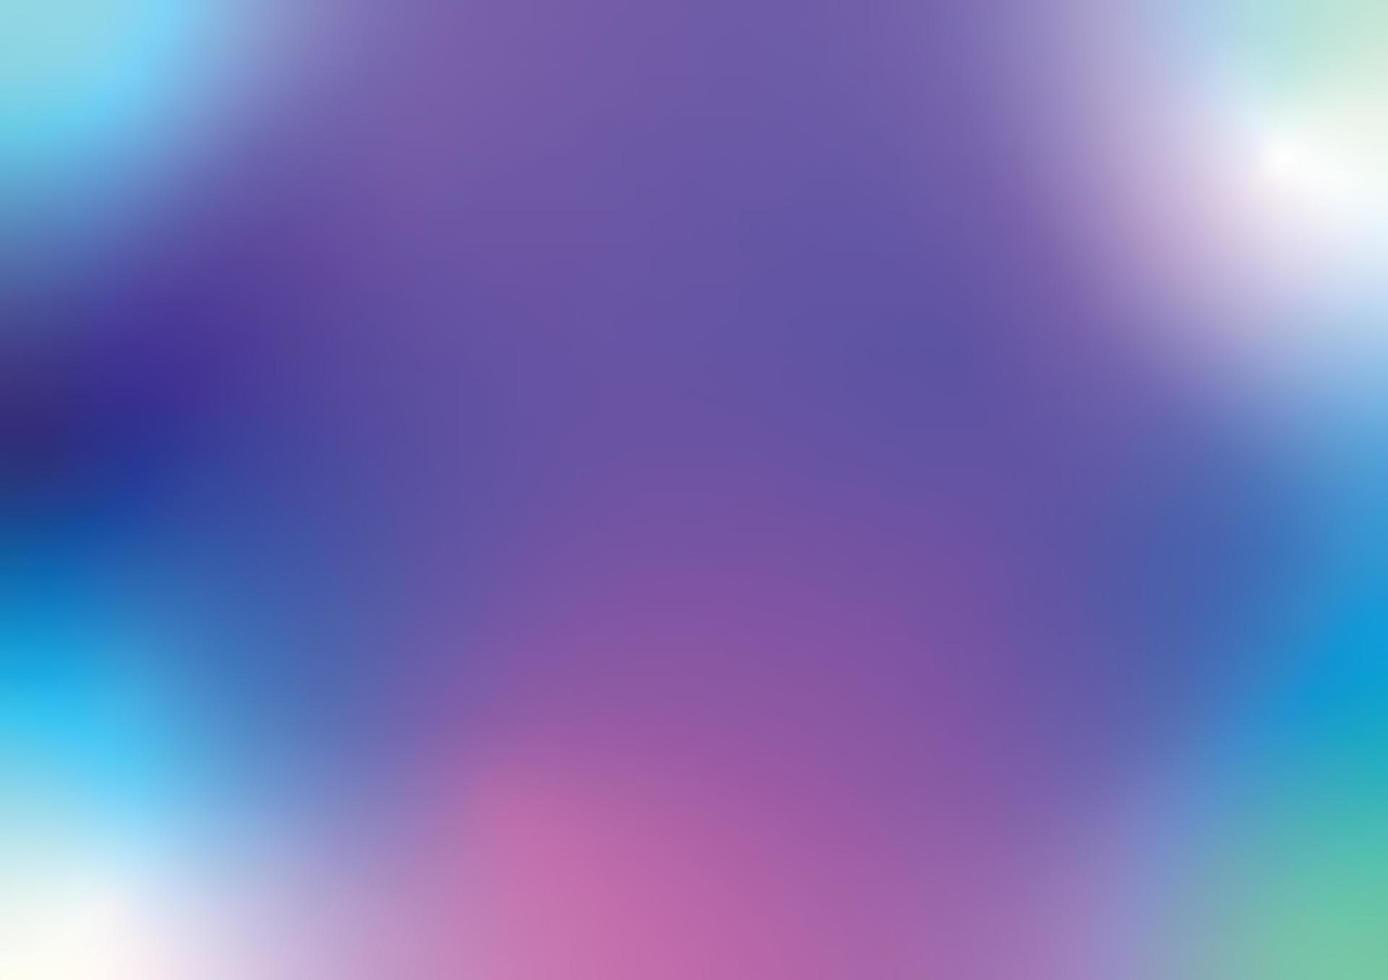 Vector illustration nature gradient background with bright sunlight. Abstract blurred background. Ecology concept for your graphic design, banner or poster.